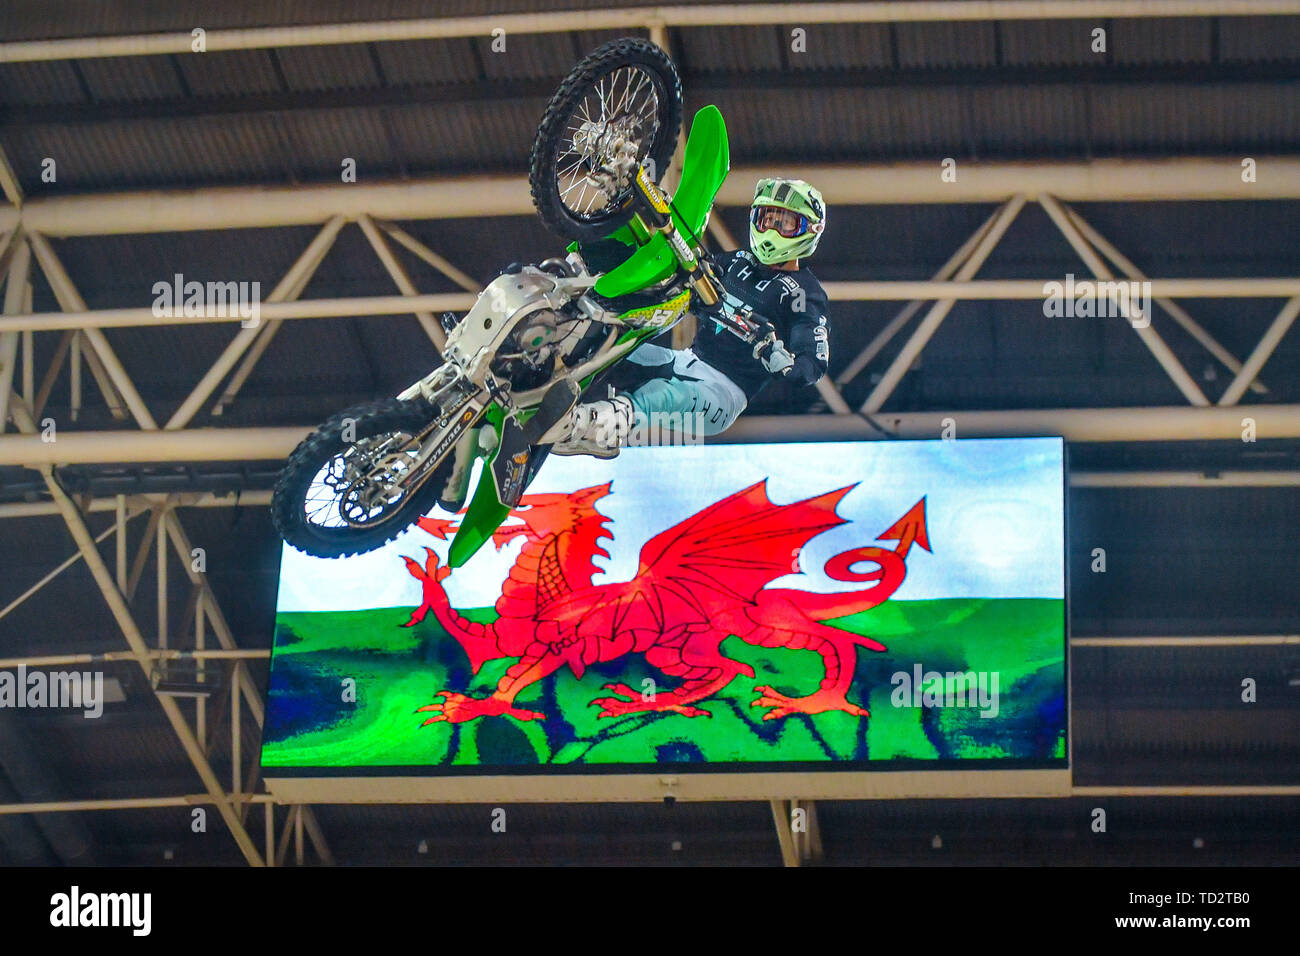 A motor bike rider jumps pulls a trick in front of an image of the Welsh  flag at the launch of the Nitro World Games freestyle motor cross event, at  the Principality